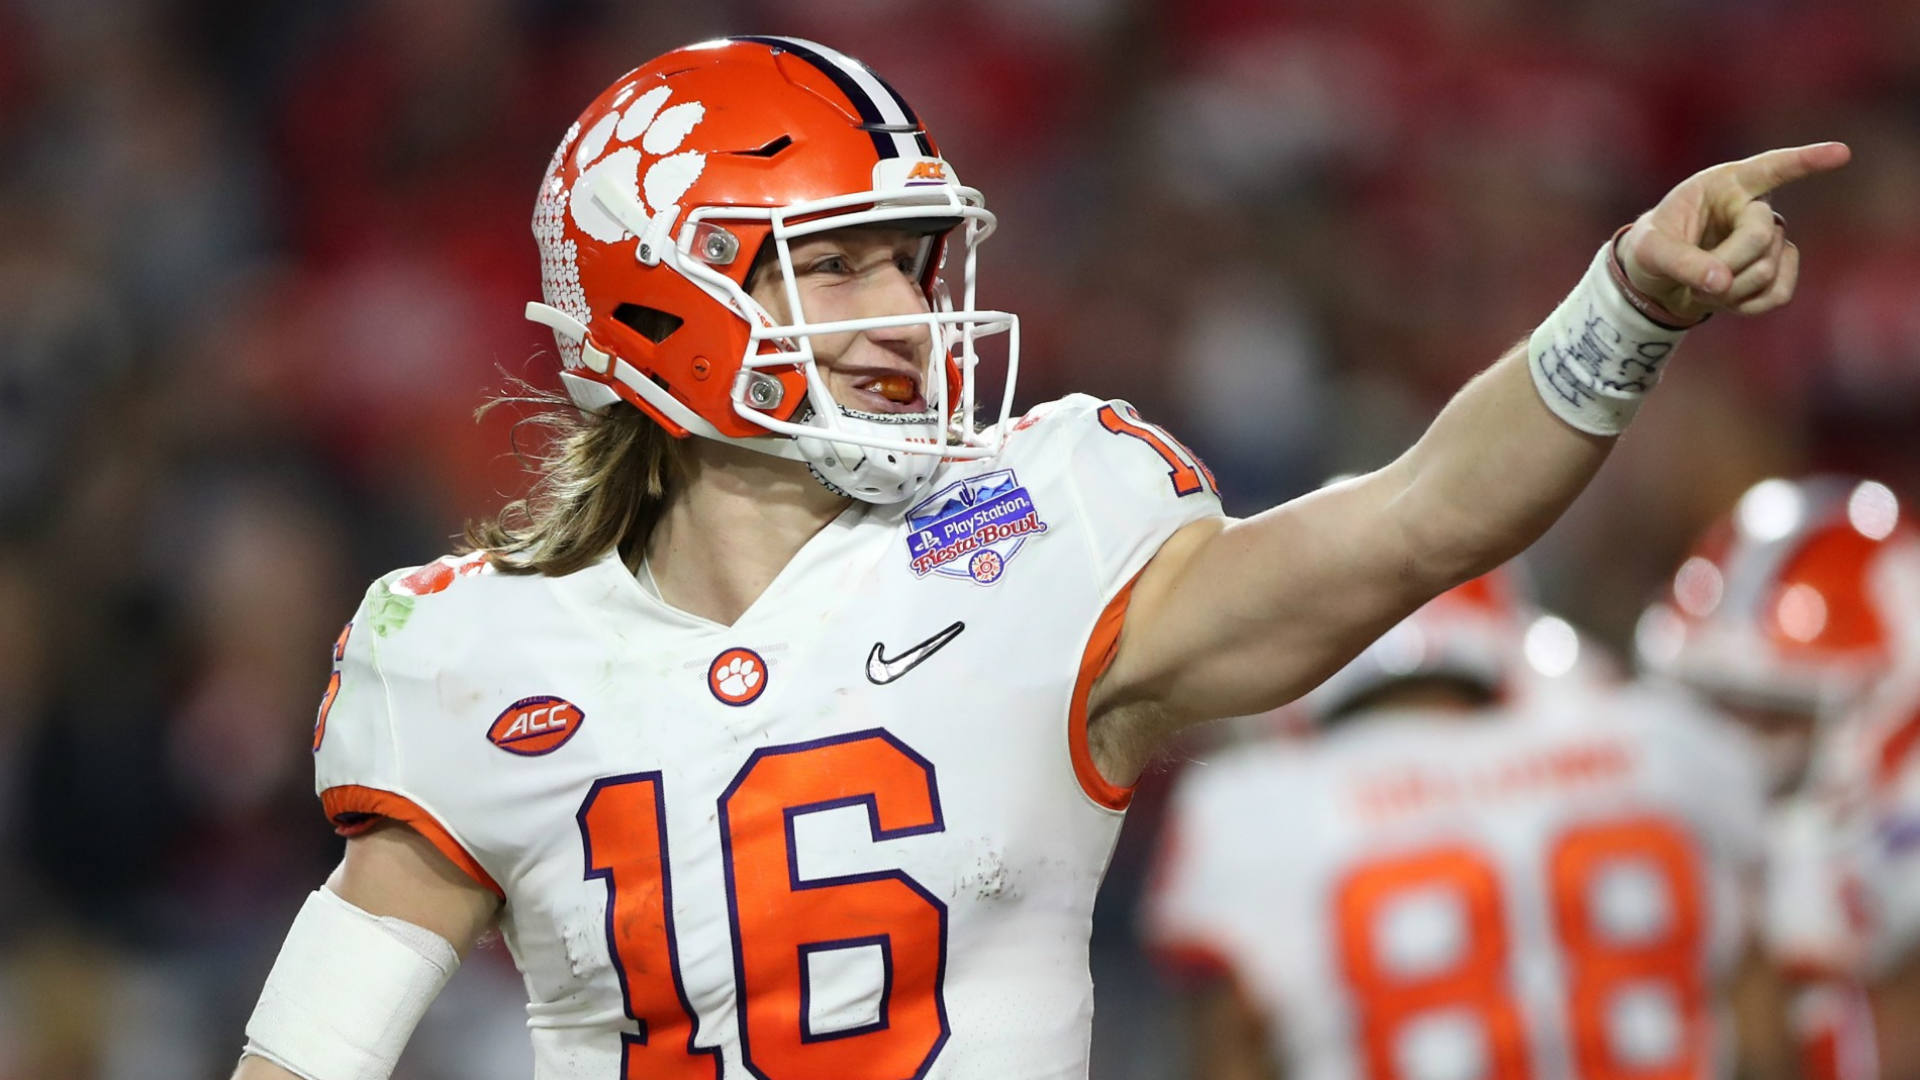 NFL Draft prospects 2021: Big board of top 100 players overall, updated position rankings